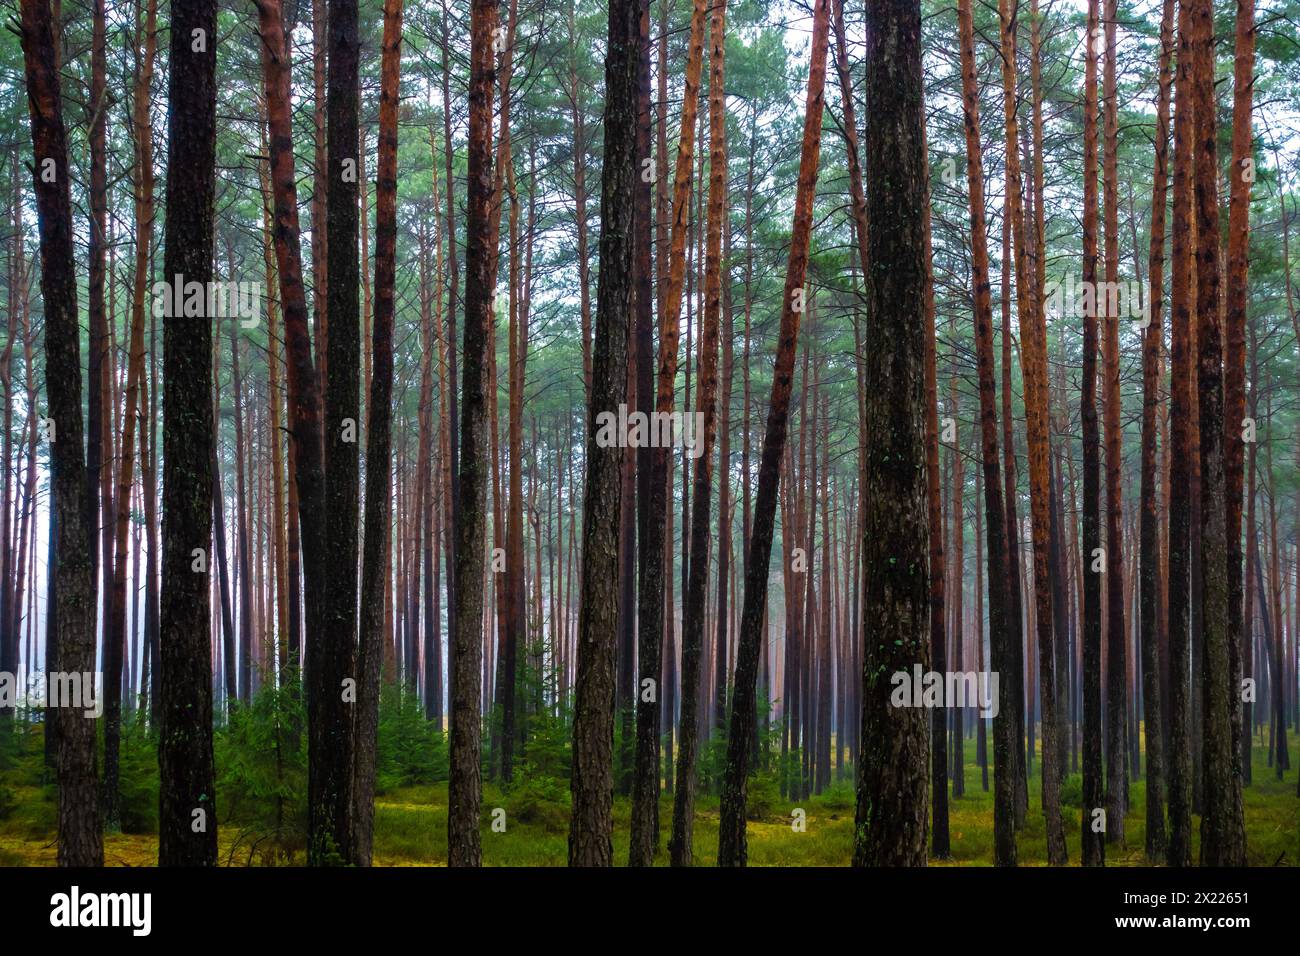 Dark pine forest in early spring. Light shining through the rows of tree trunks. Photo taken during the day with natural light. Stock Photo